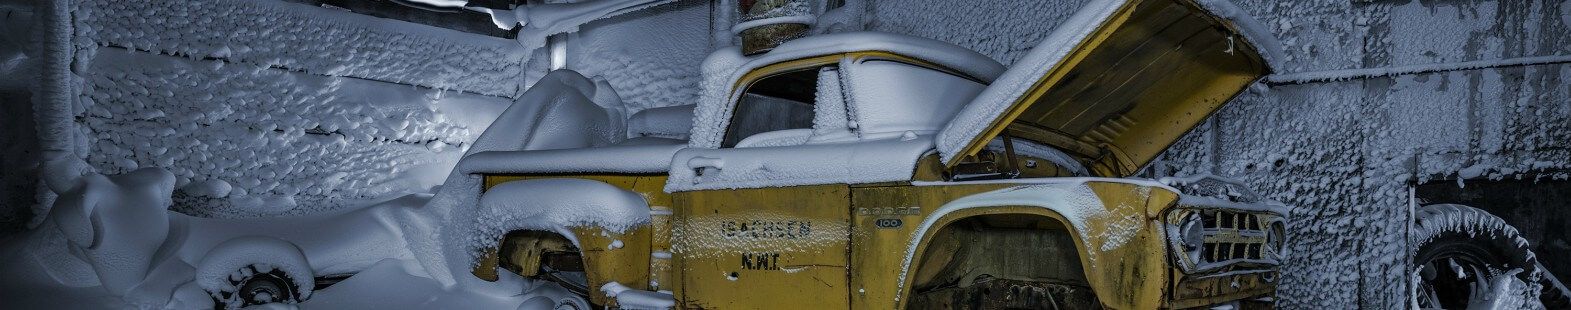 Image from Isachsen by aAron munson shows an old yellow pick up truck covered in snow, in a frozen garage